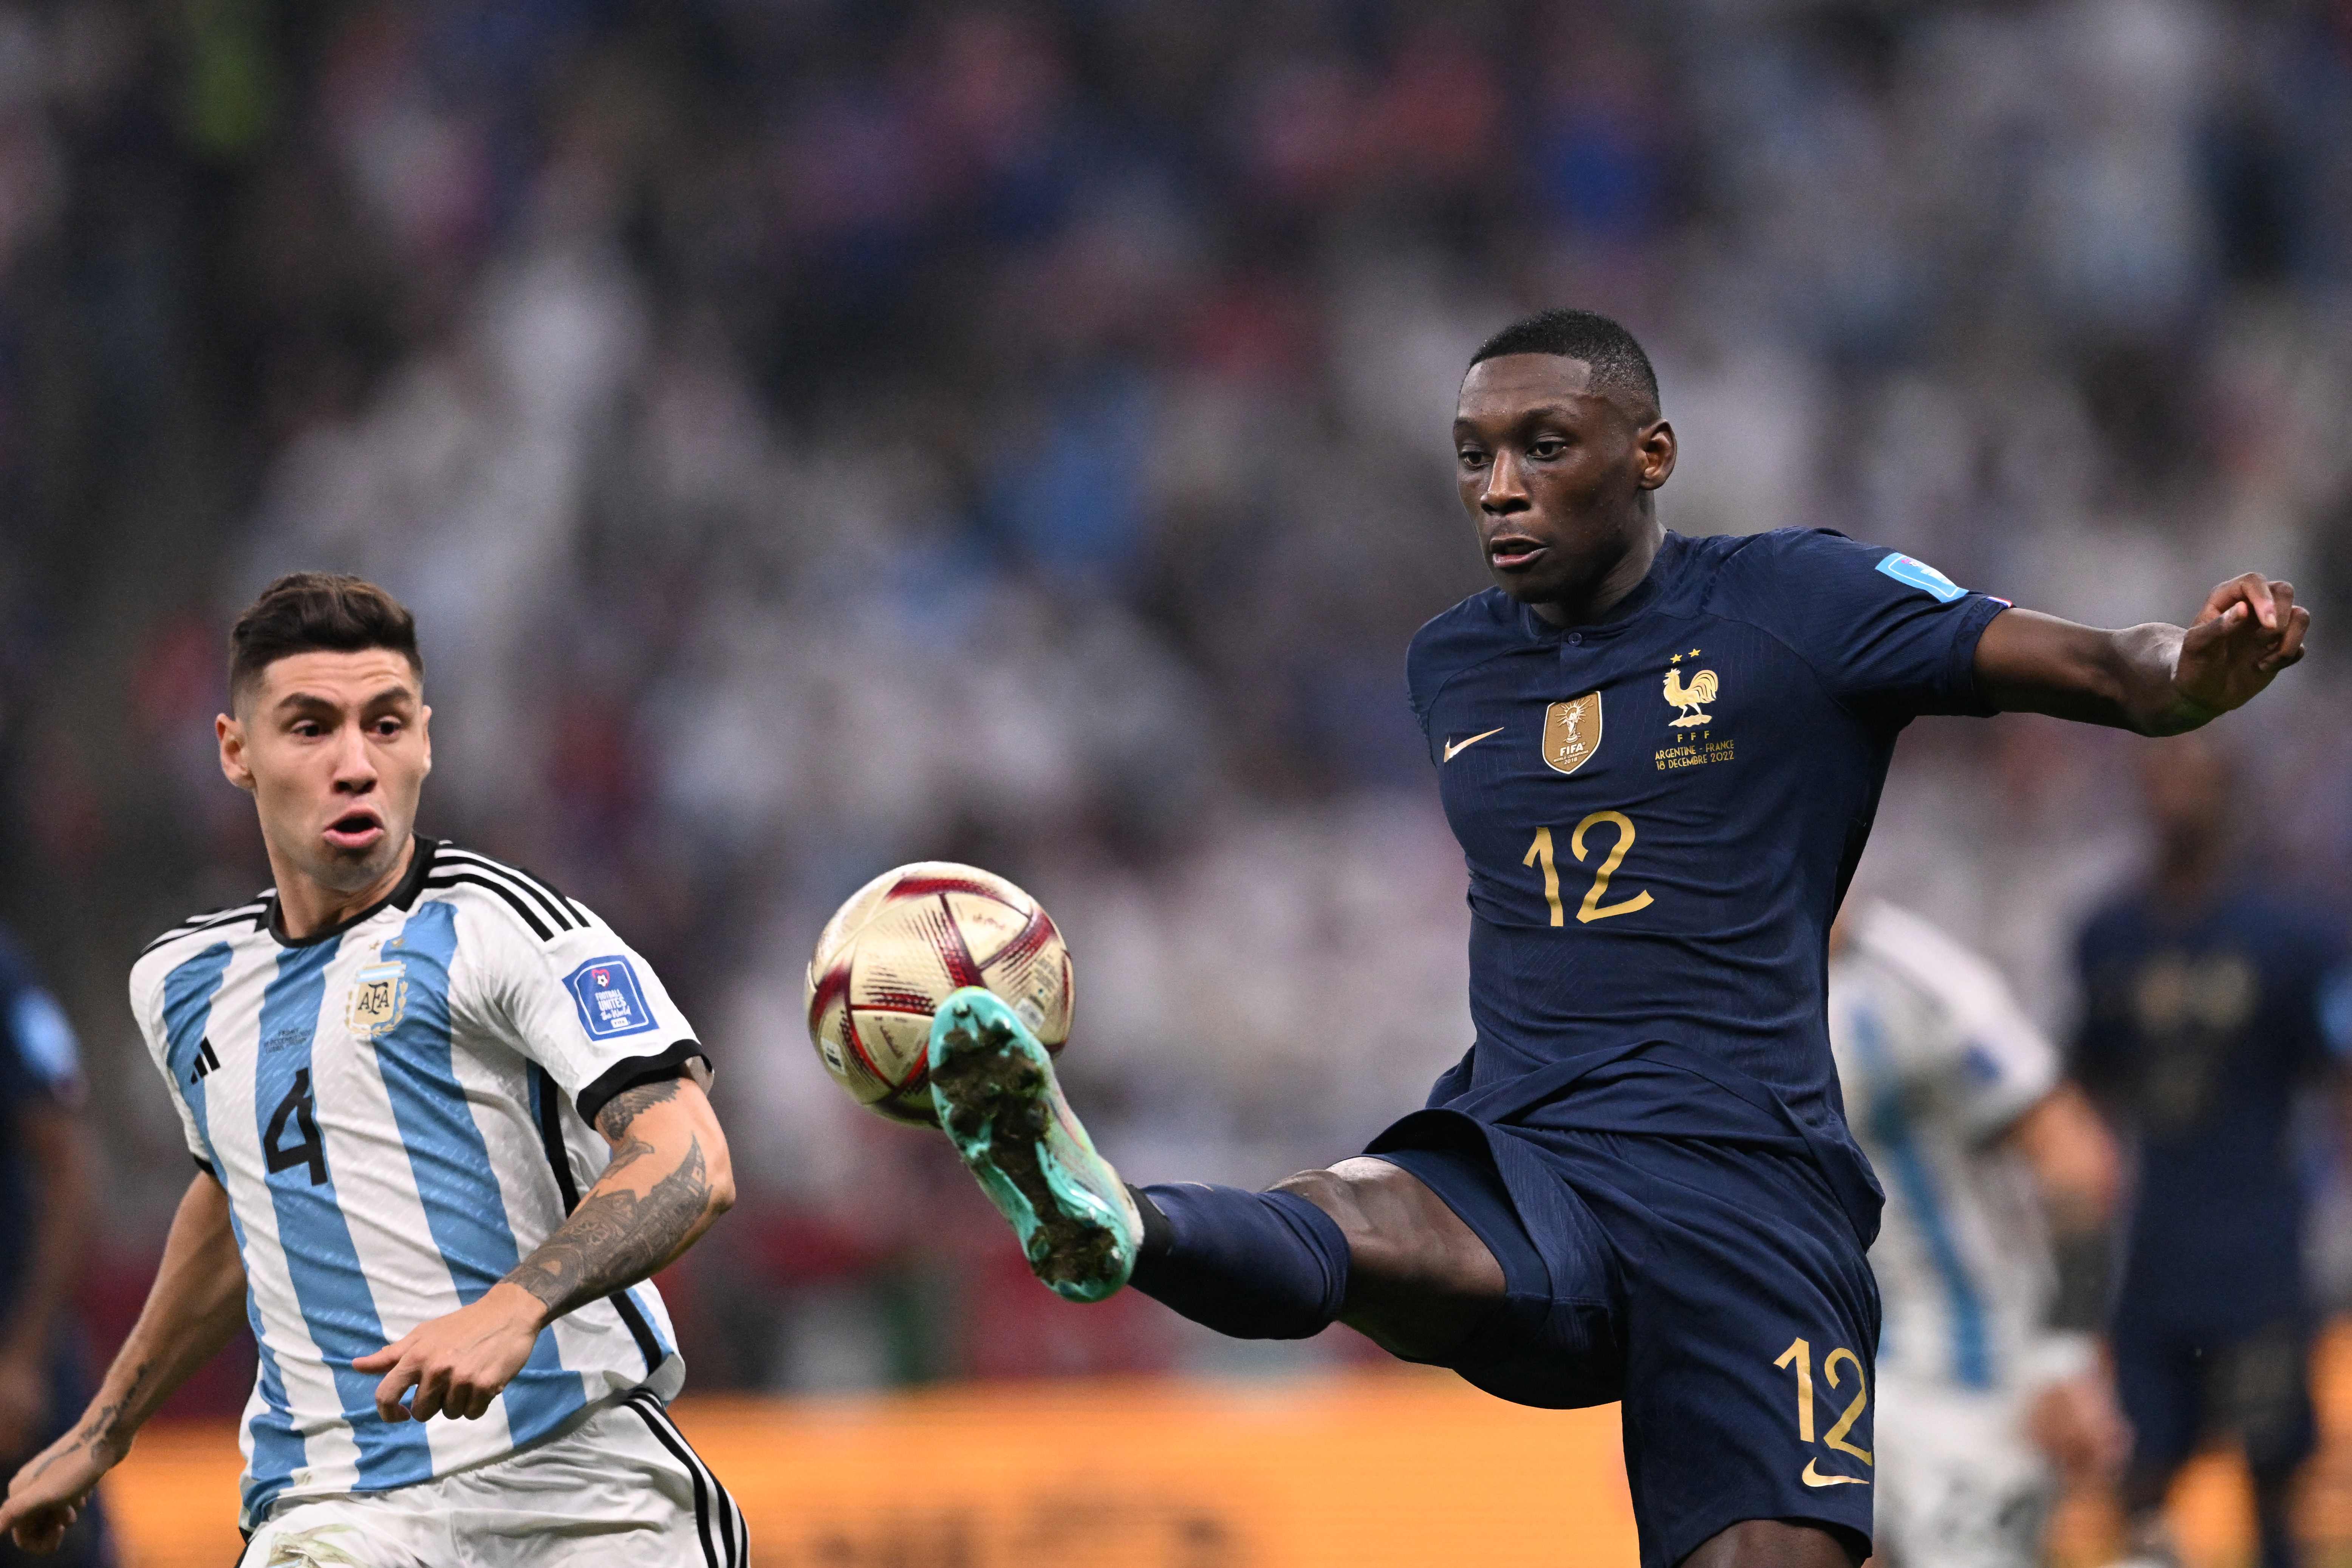 Randal Kolo Muani in action for France during the World Cup final